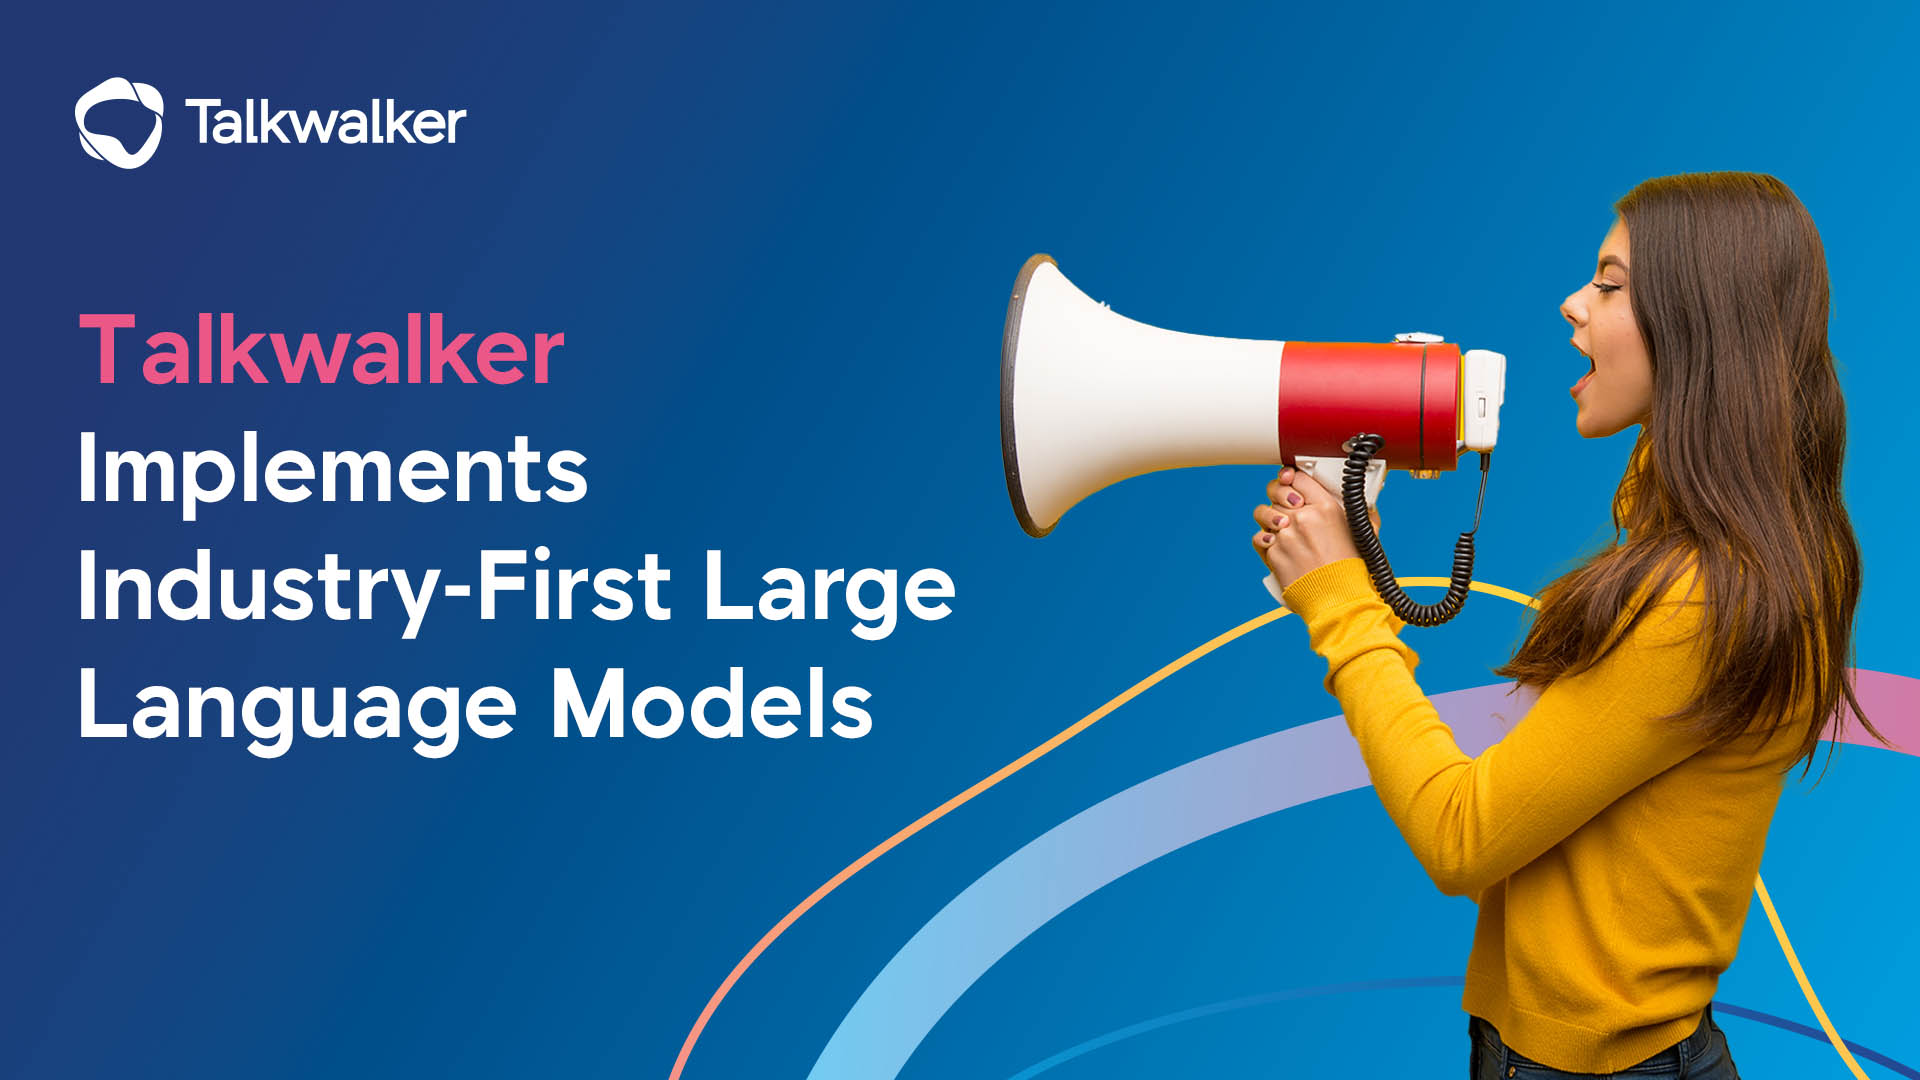 Talkwalker Implements Industry-First Large Language Models